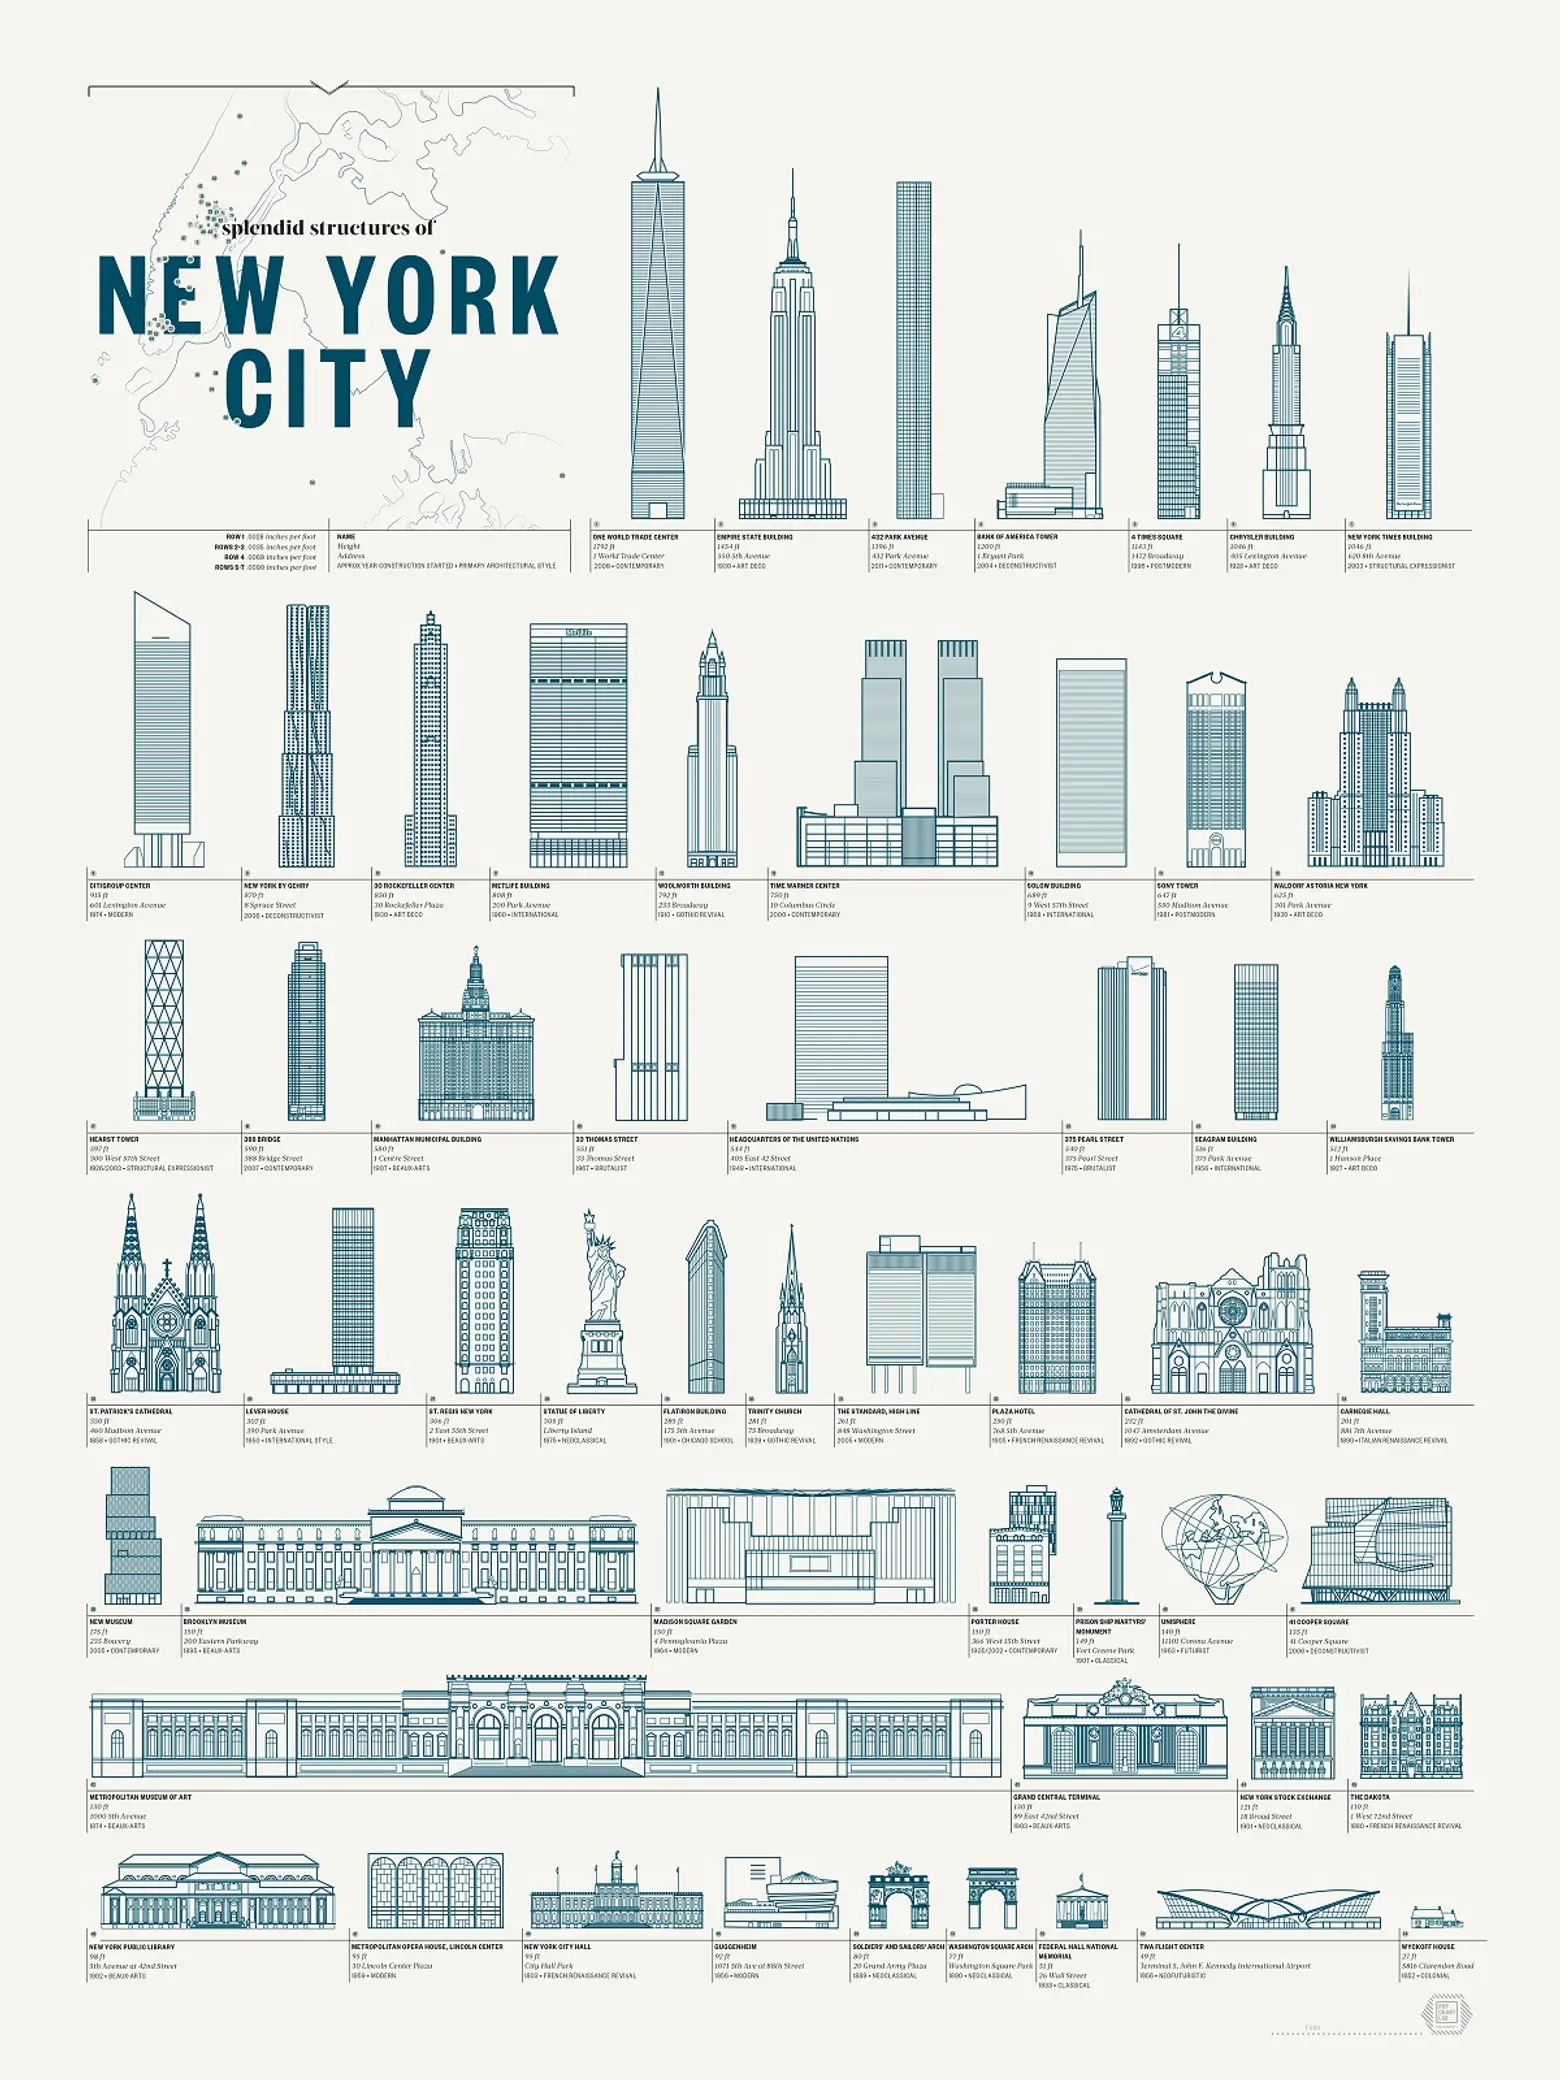 Pop Chart Lab, Splendid Structures of NYC, The Schematic of Structures